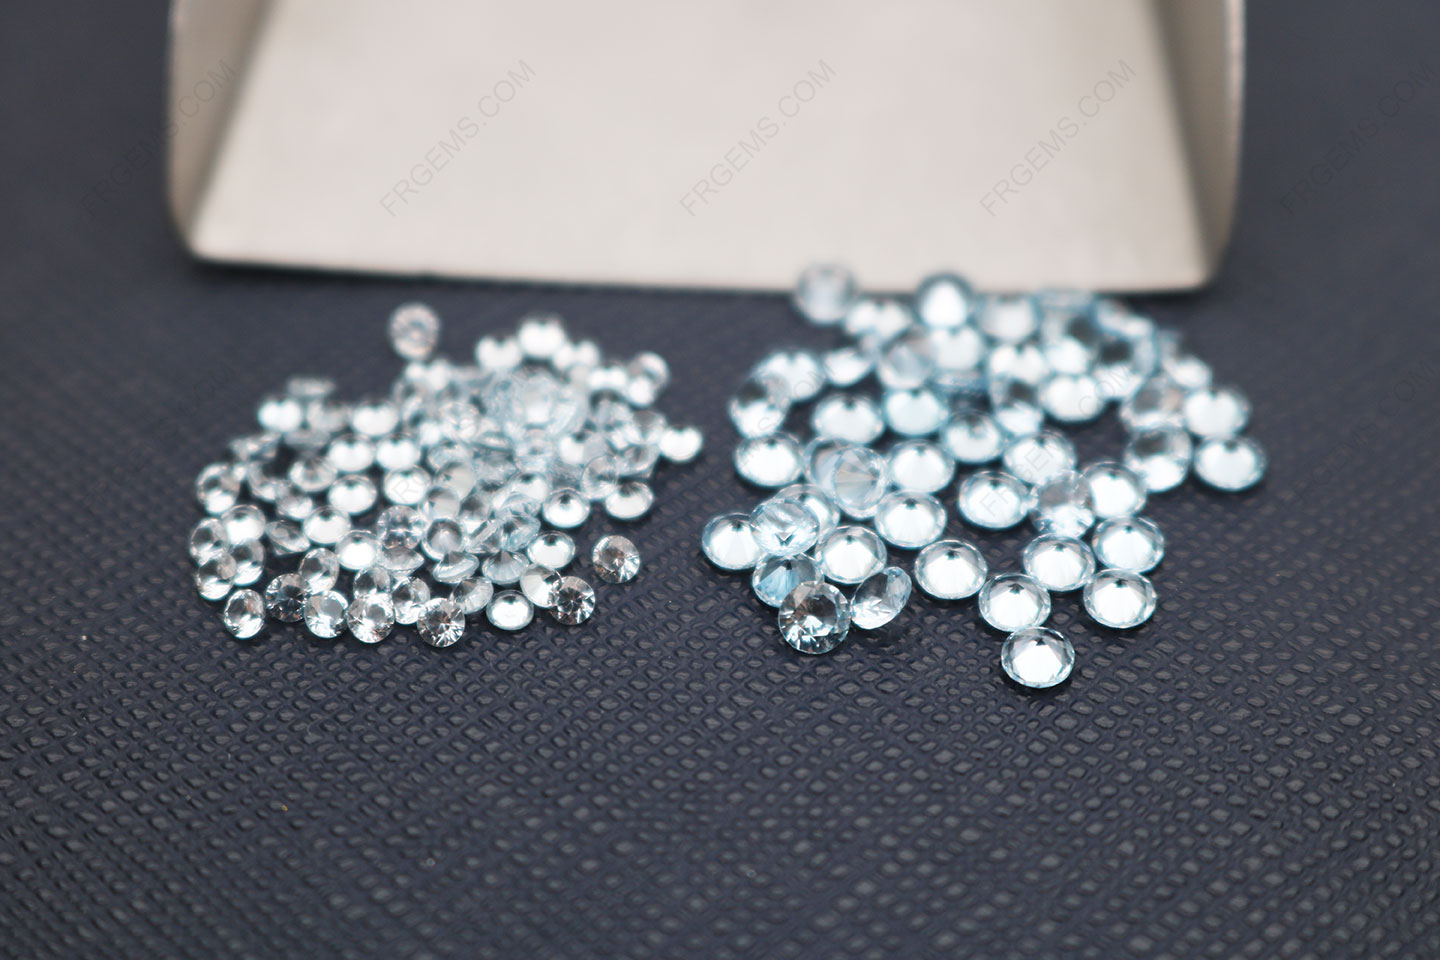 Synthetic Aquamarine spinel Aqua blue #106 Round Shape Faceted Cut 2mm and 3mm gemstones